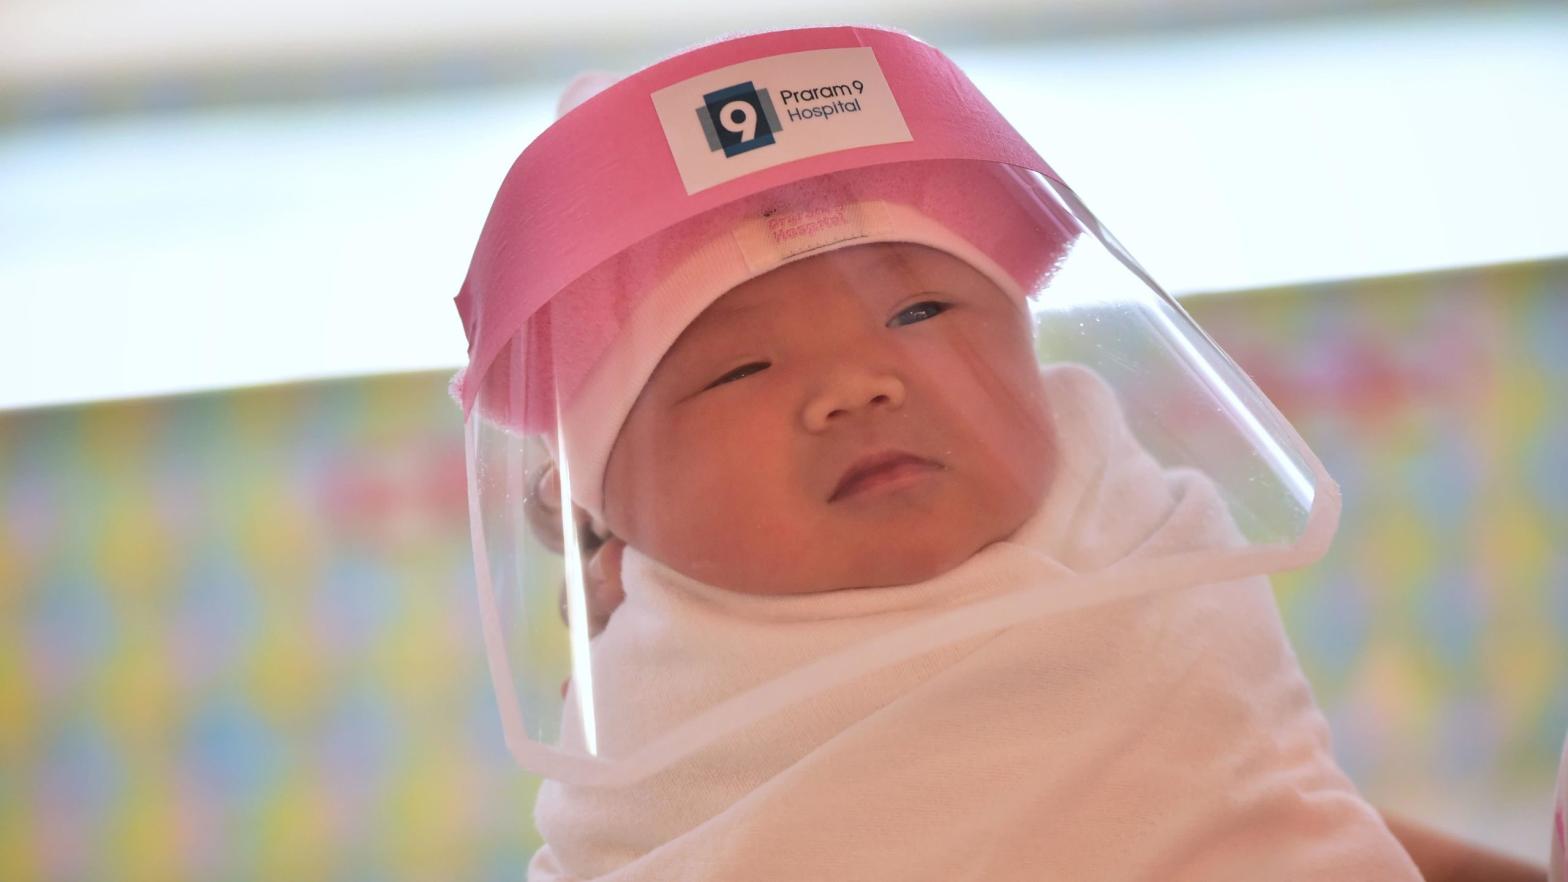 A photo of a newborn baby wearing a face shield, delivered at Praram 9 Hospital in Bangkok, Thailand on April 9, 2020.  (Photo: Lillian Suwanrumpha, Getty Images)